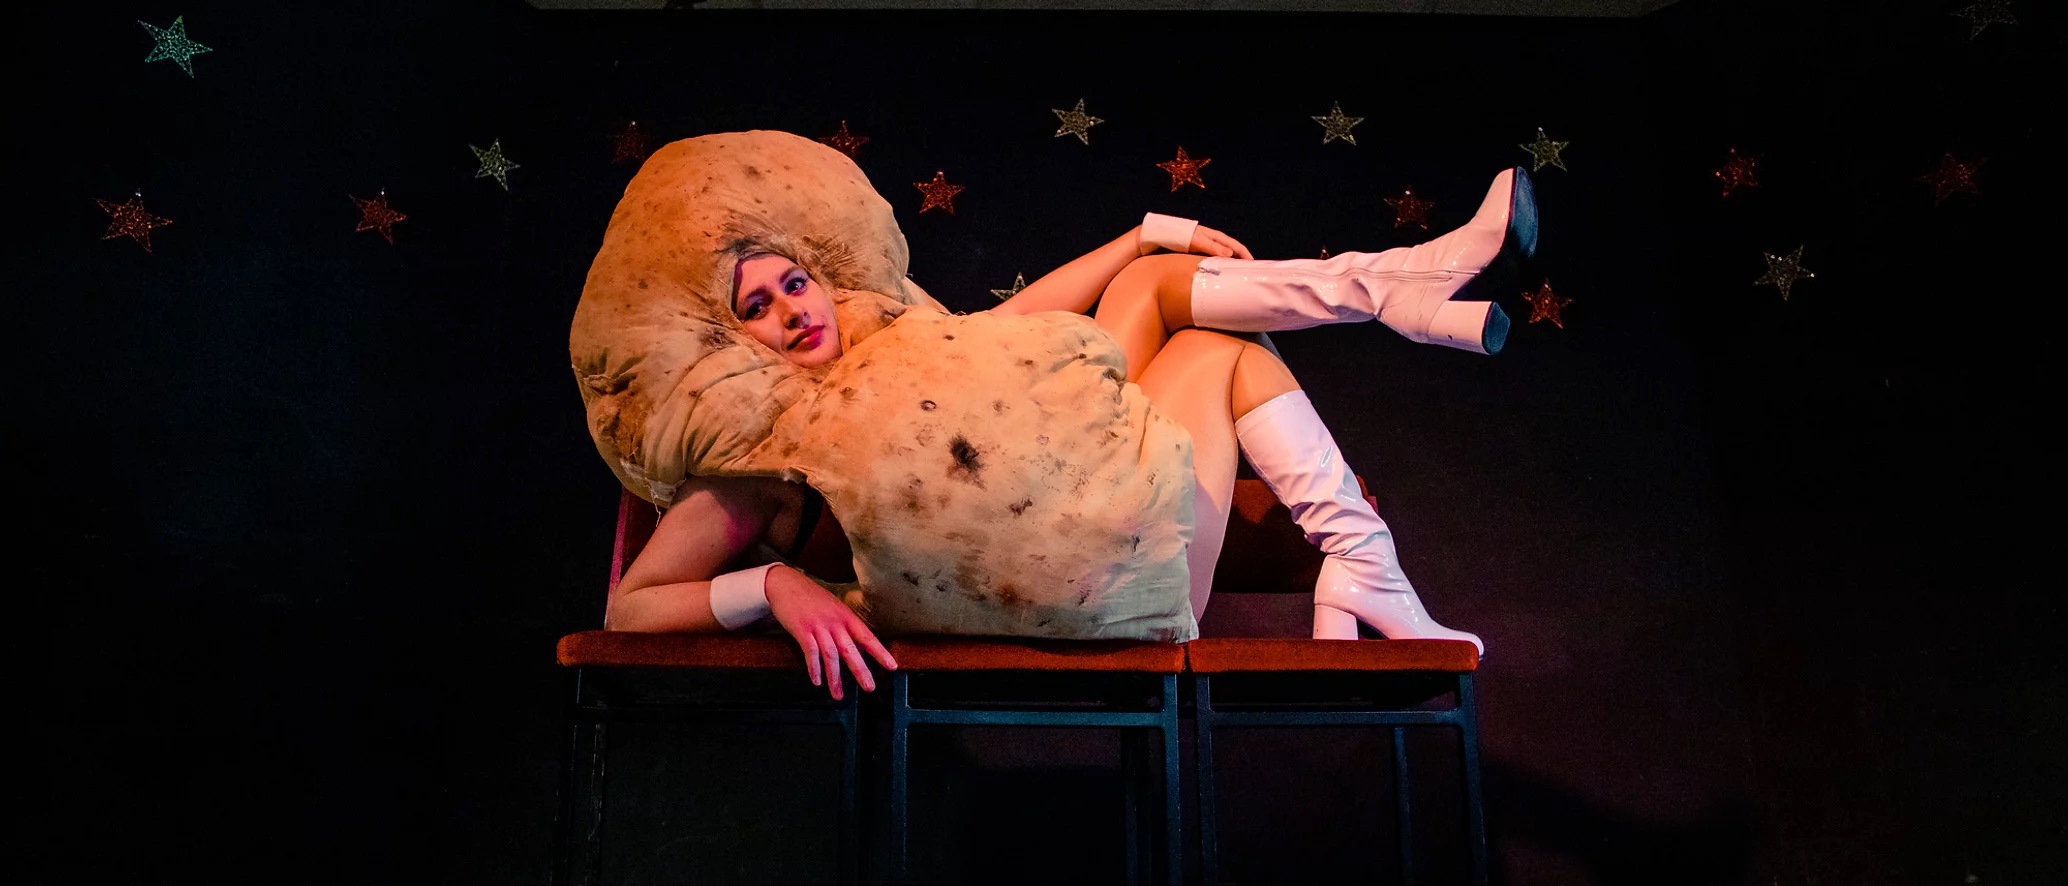 A woman dressed as a giany potato reclines glamourously on a couch